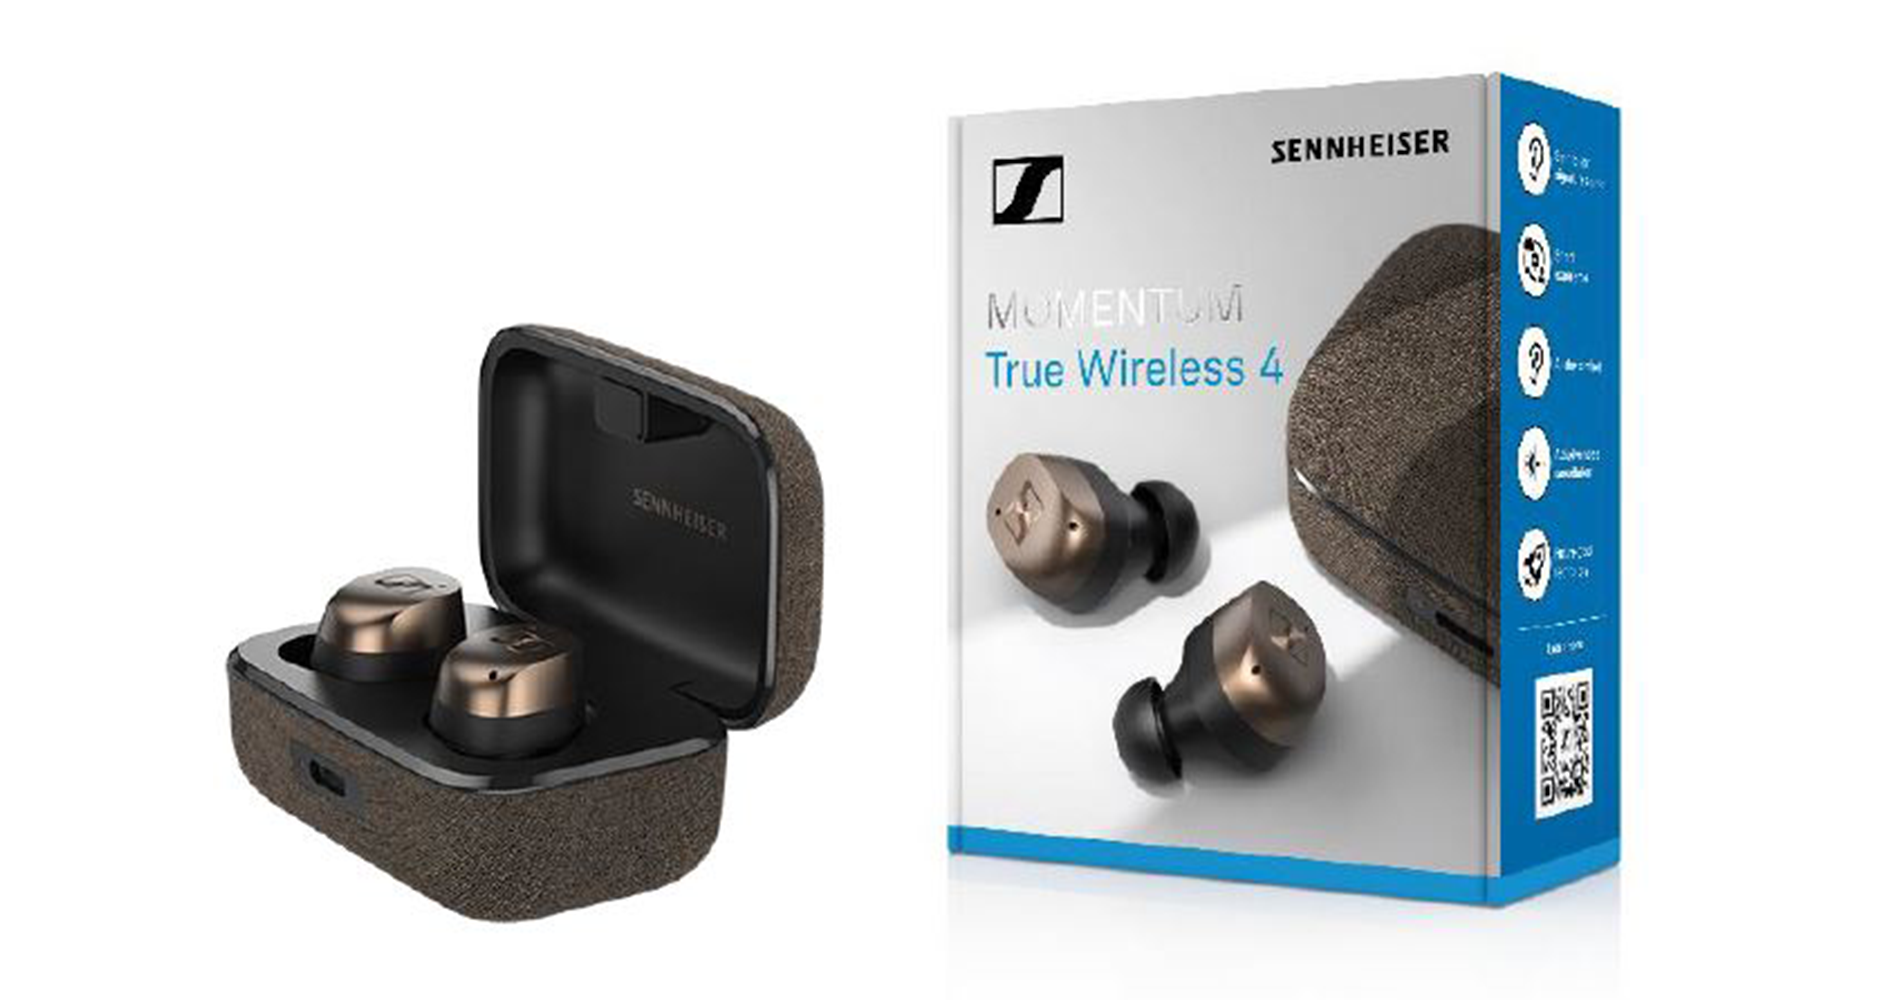 Sennheiser MOMENTUM True Wireless 4 with Adaptive Noise Cancellation In The Box